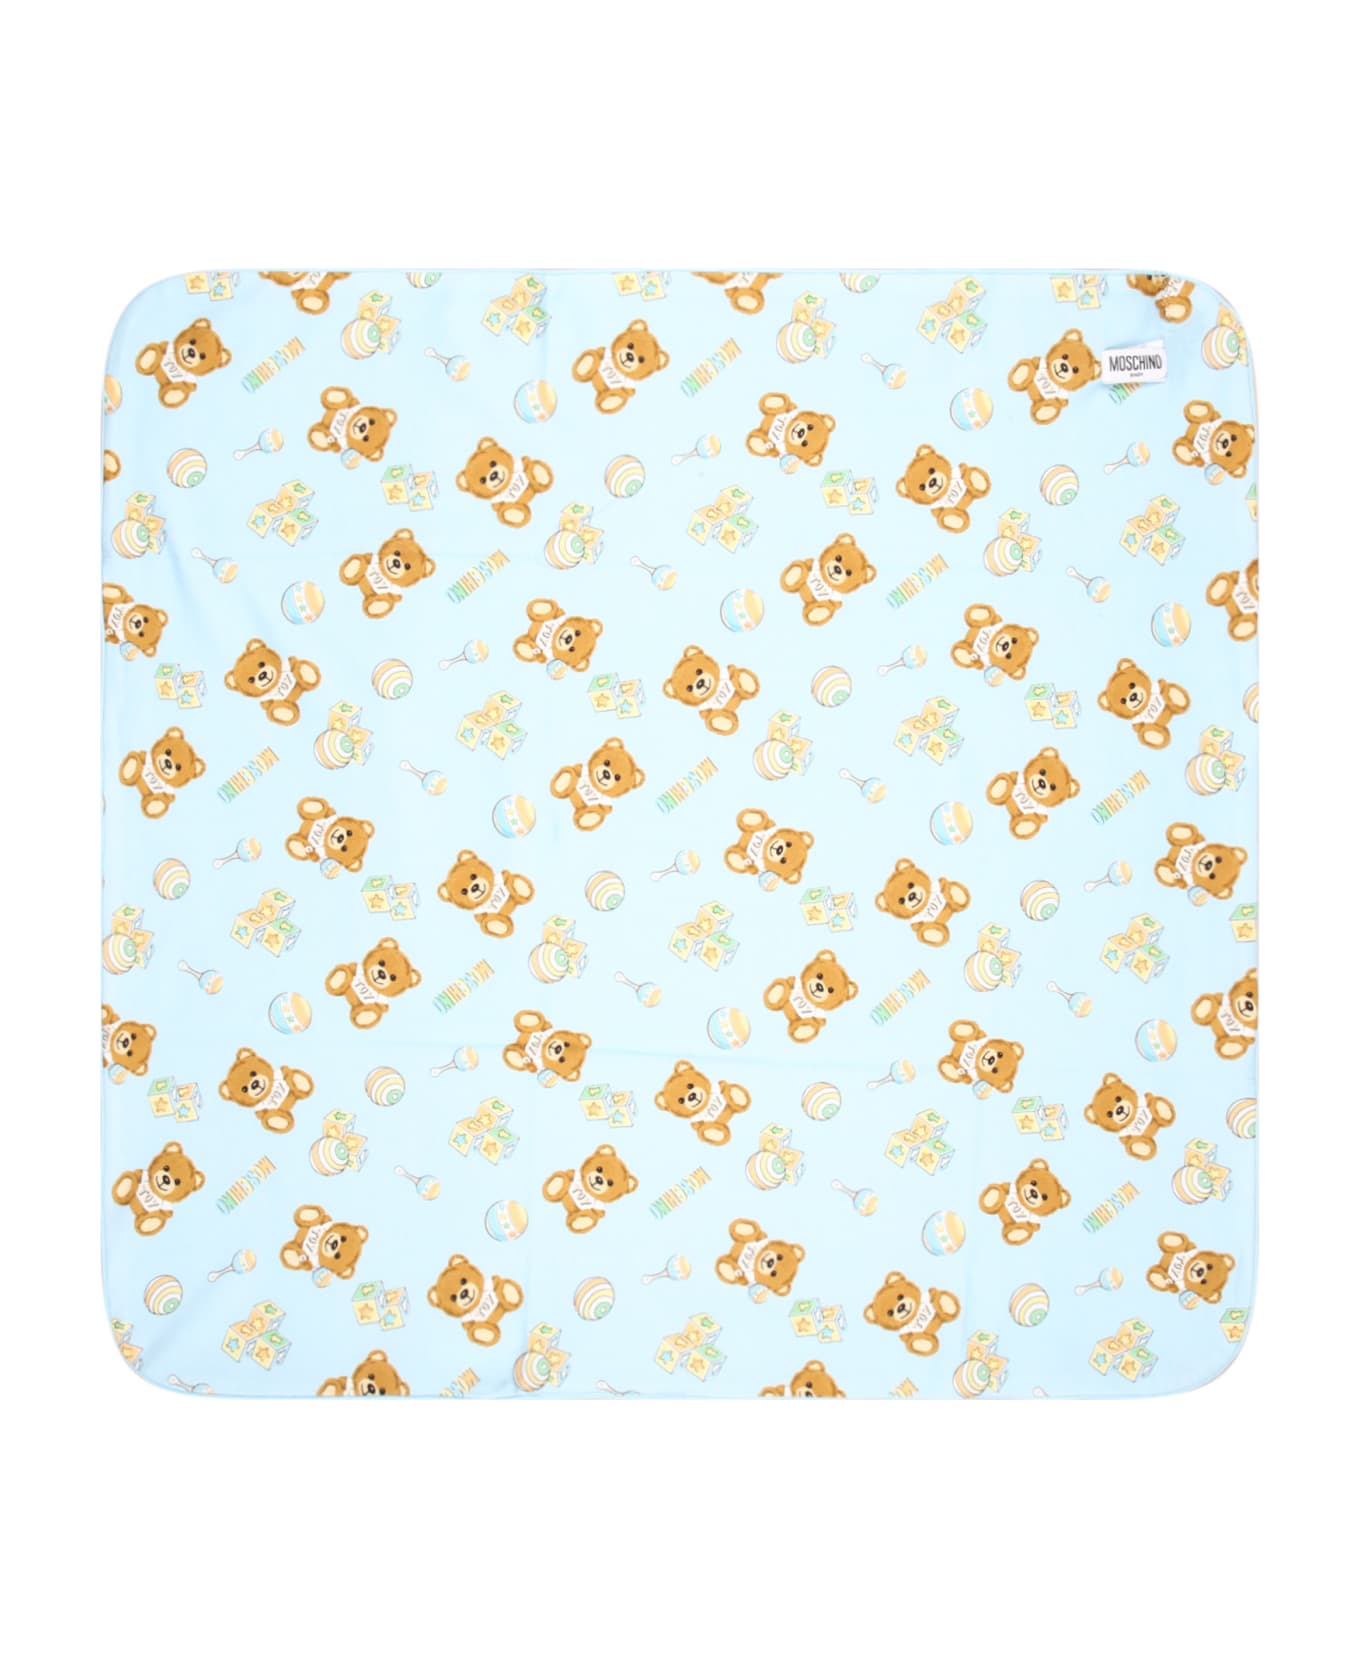 Moschino Light Blue Blanket For Baby Boy With Teddy Bear And Logo - Light Blue